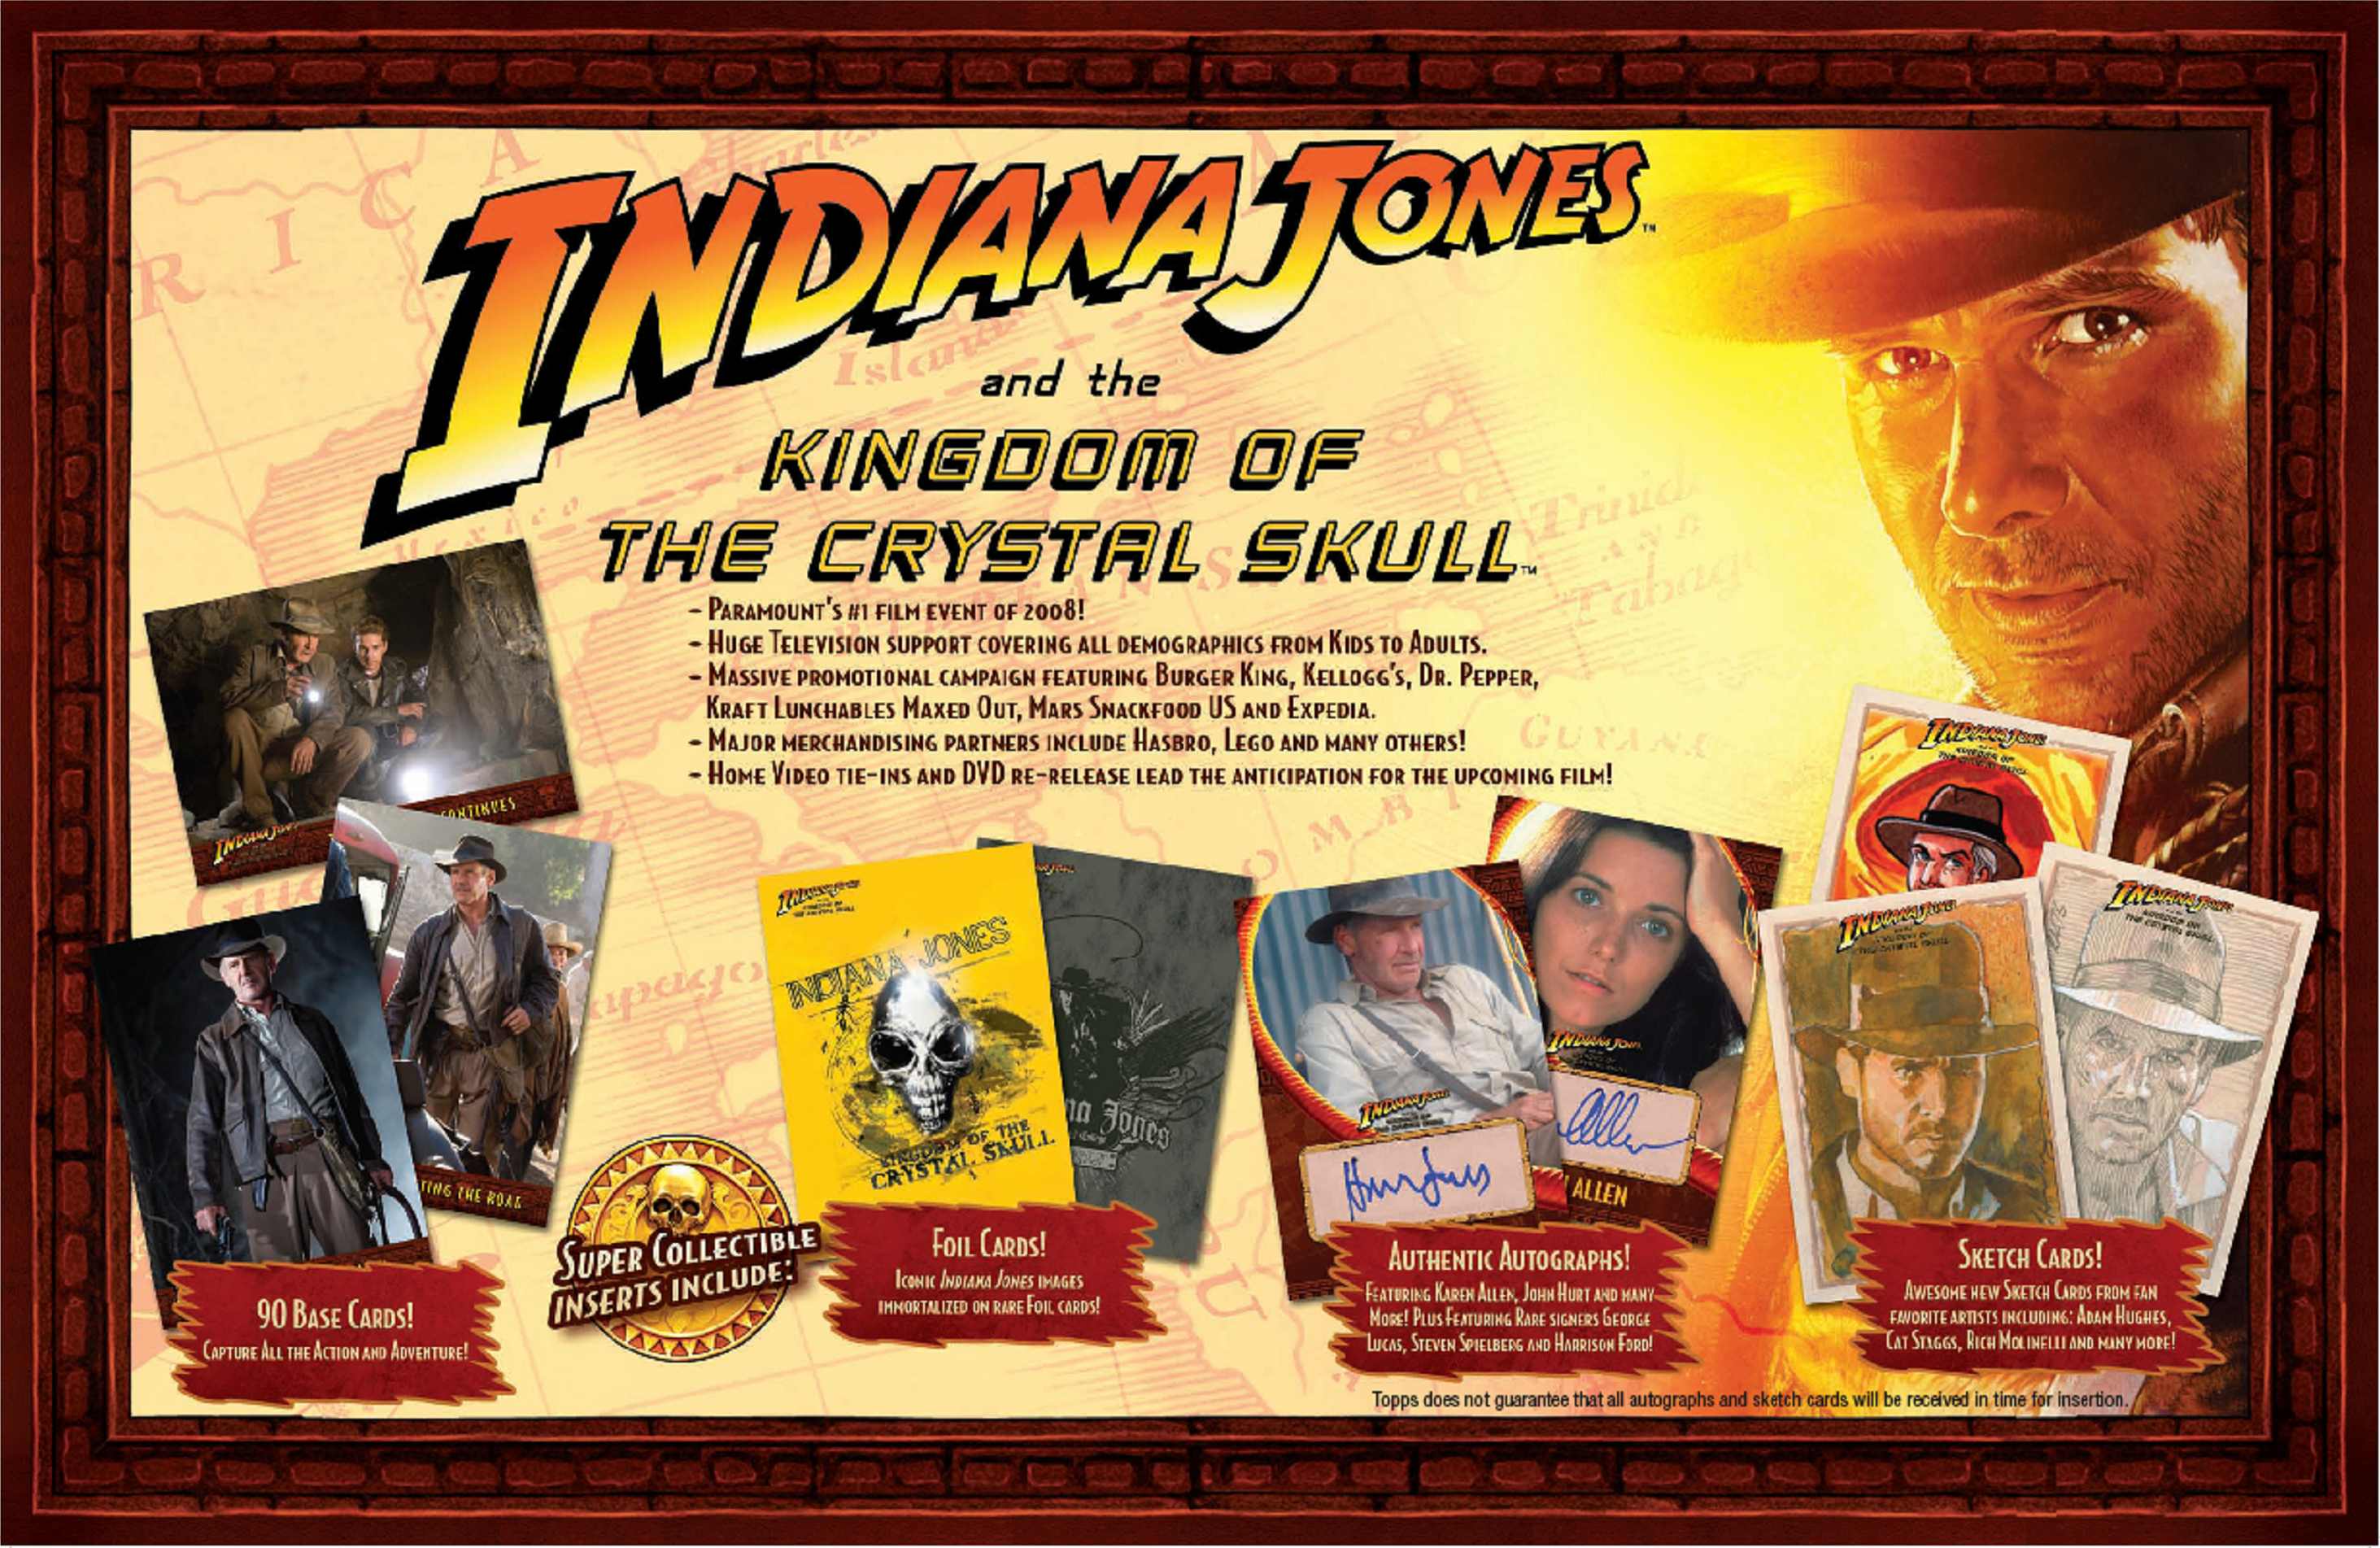 Indiana Jones™ TRADING CARDS Kingdom of the Crystal Skull TOPPS Collectors Set 